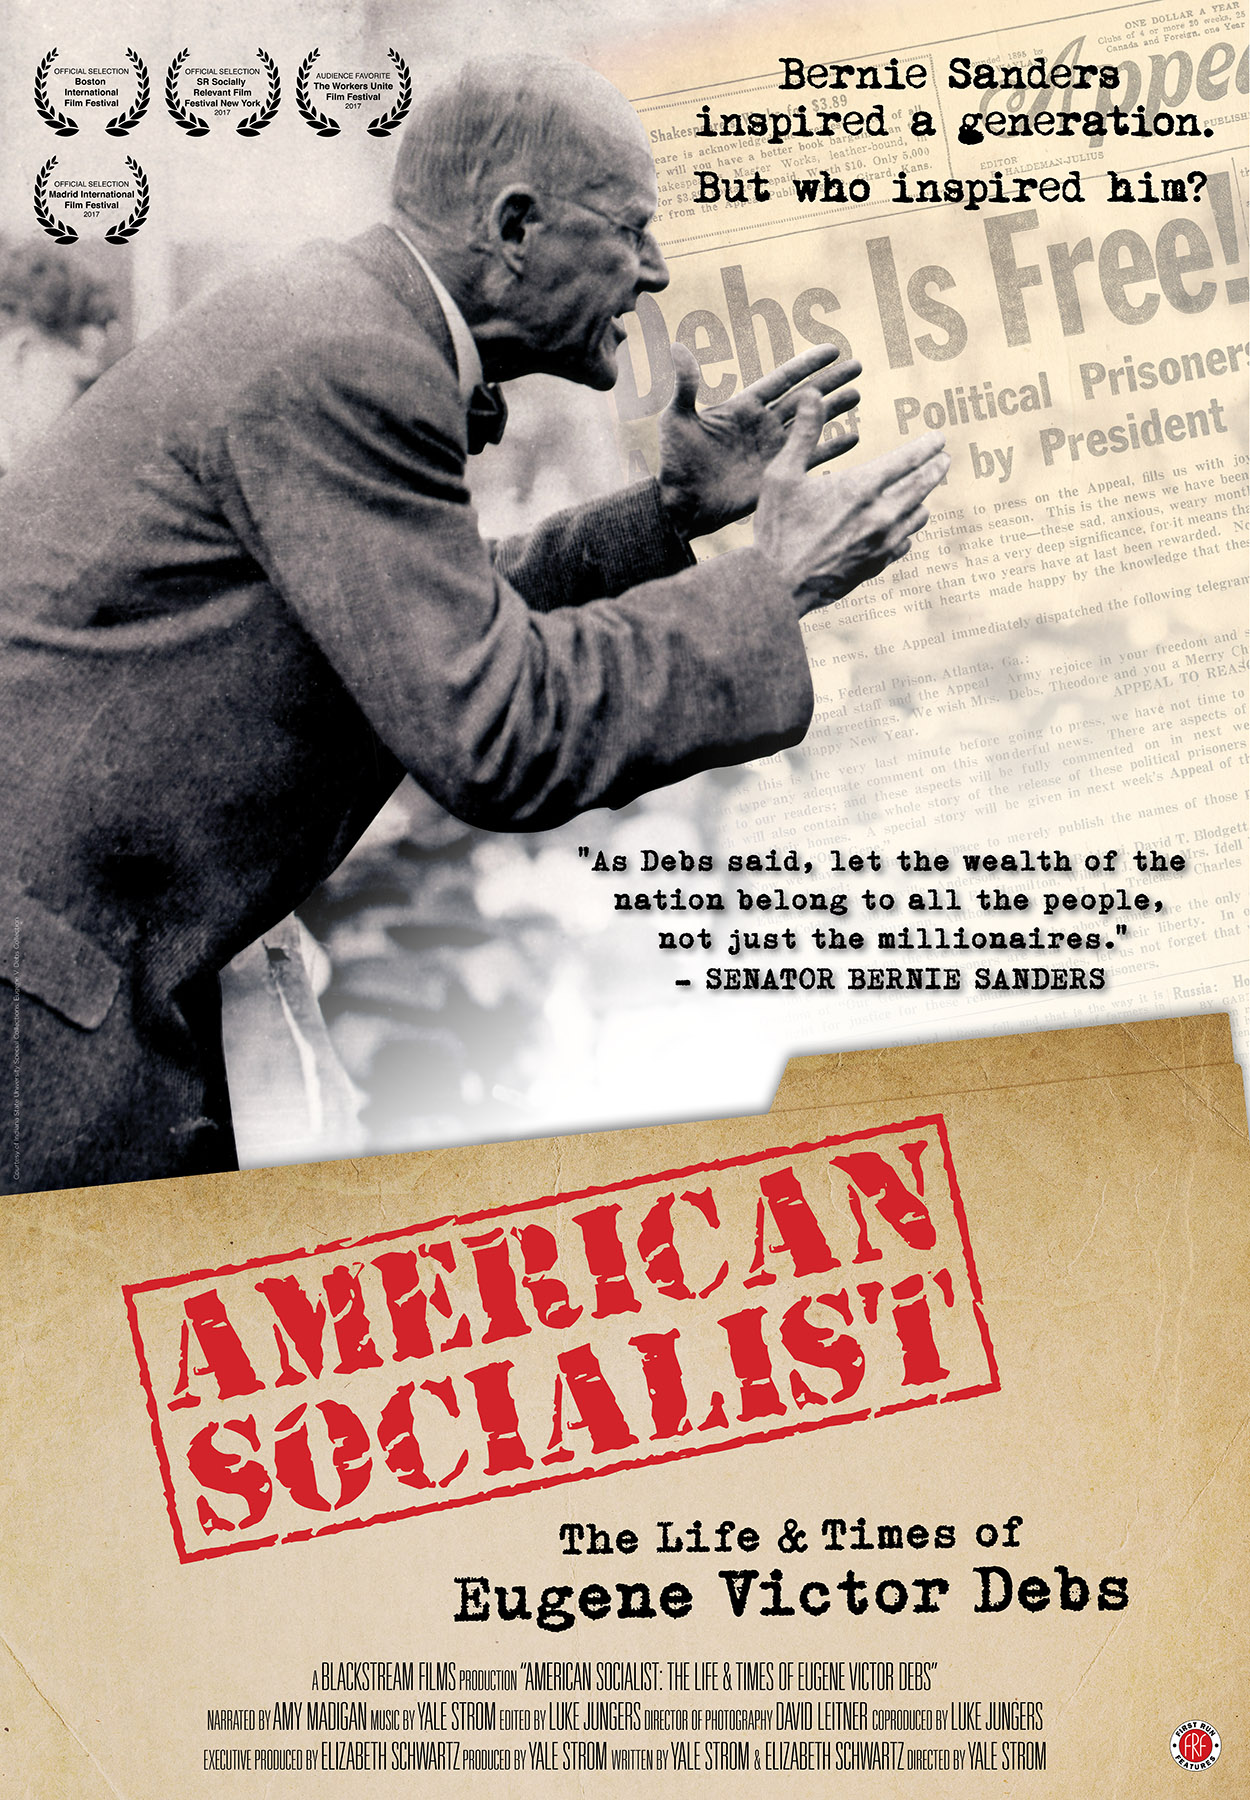 American Socialist: The Life & Times of Eugene Victor Debs